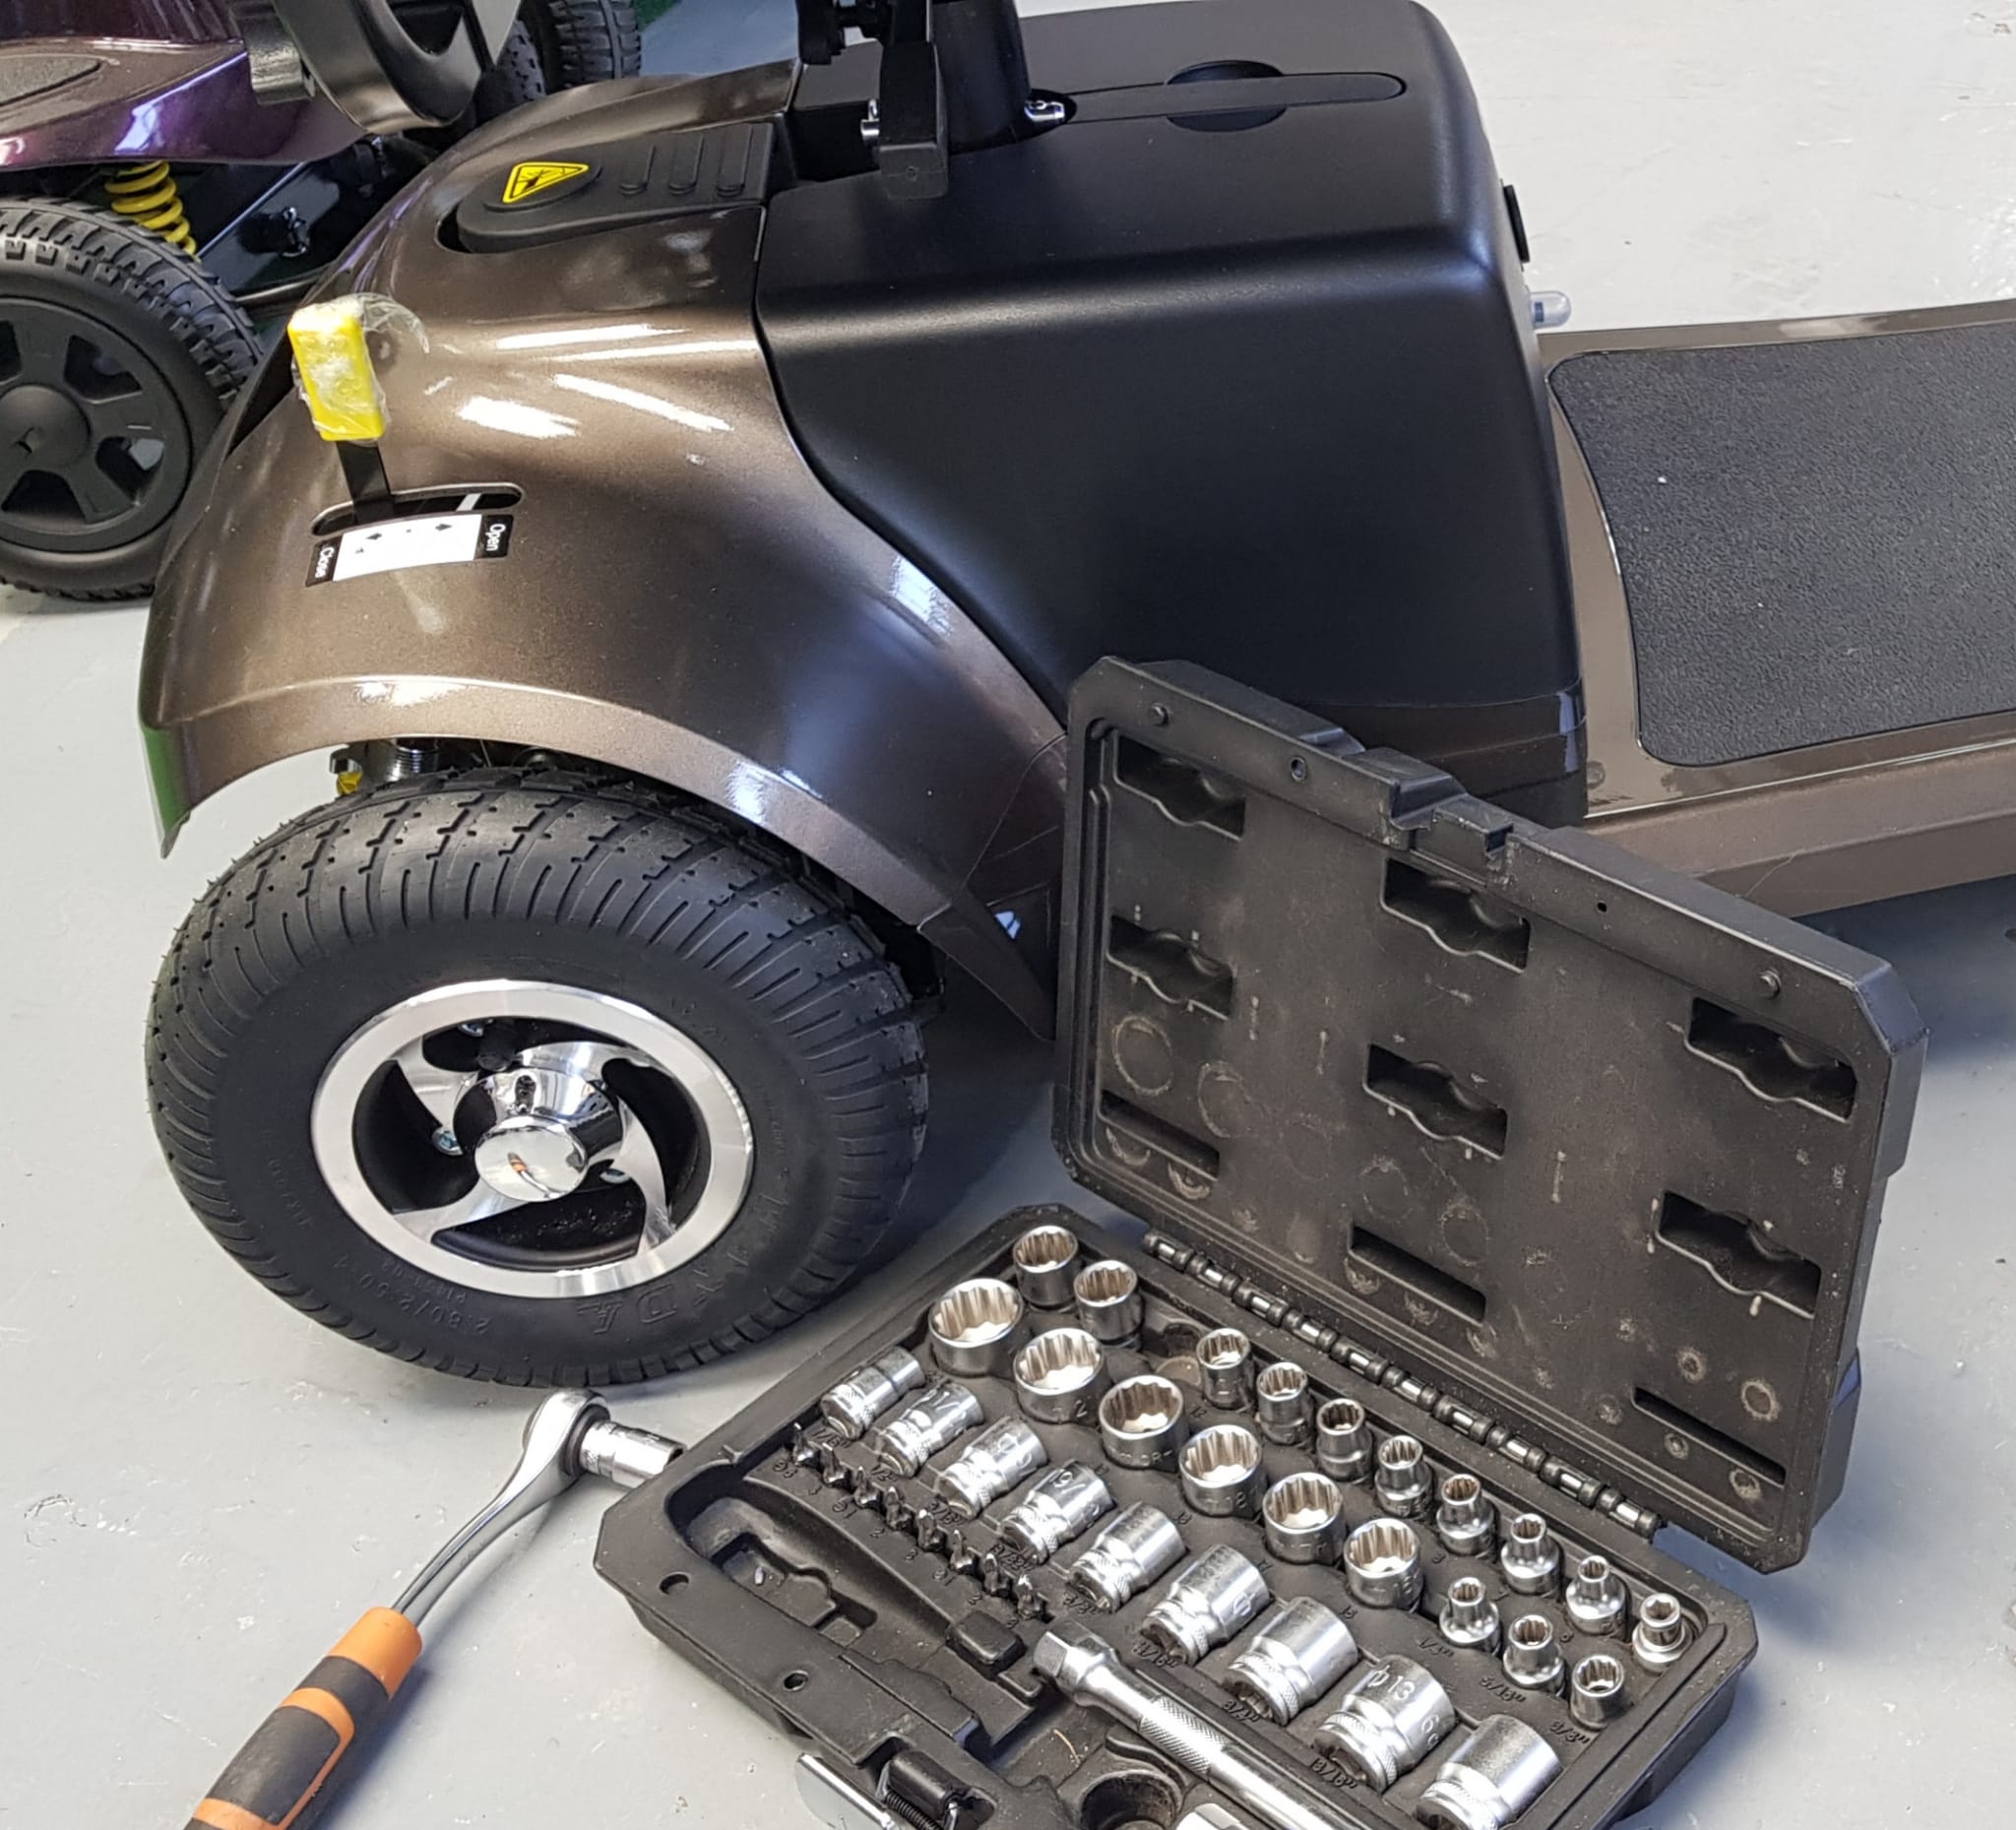 Mobility Scooter Service & Repairs In Peterborough, Stamford & Bourne £85